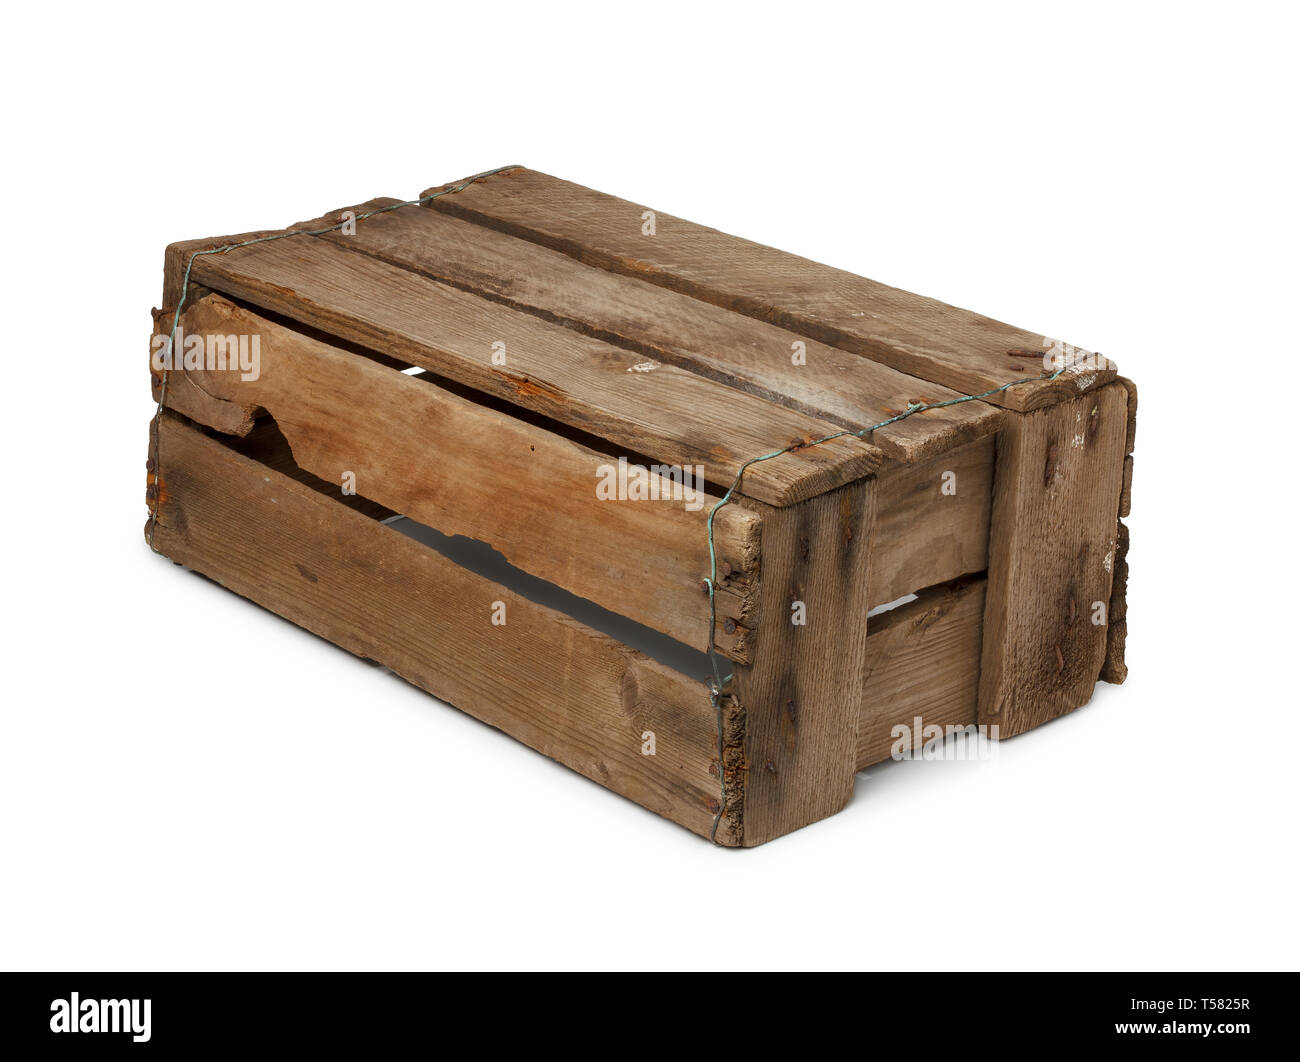 Vintage wooden box turned upside down, isolated on white background Stock Photo